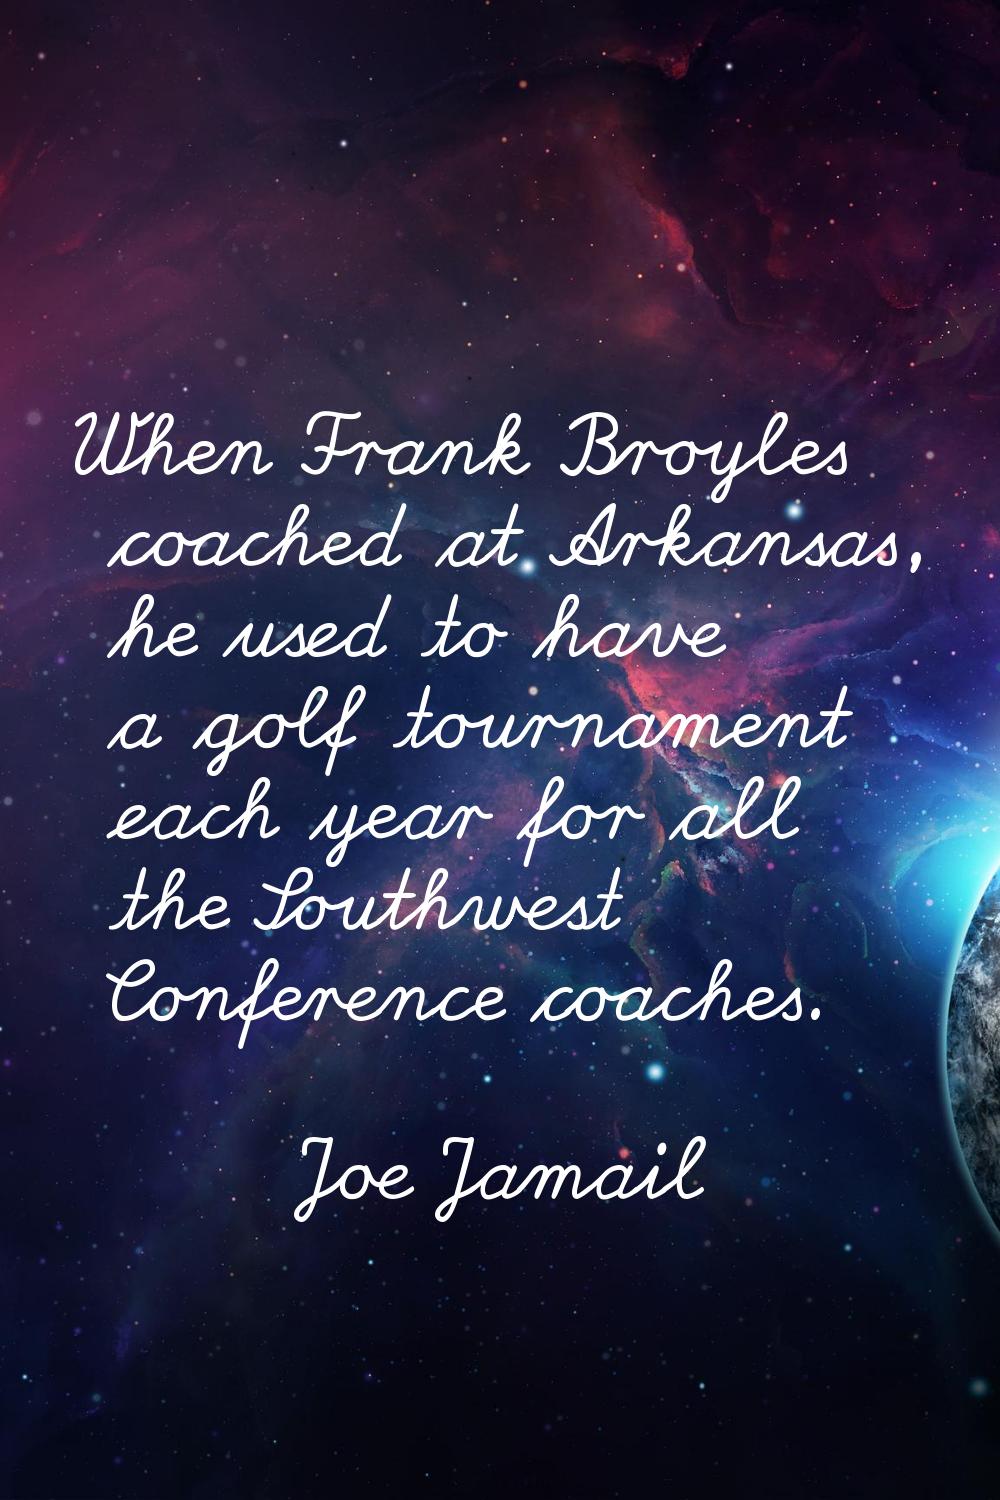 When Frank Broyles coached at Arkansas, he used to have a golf tournament each year for all the Sou